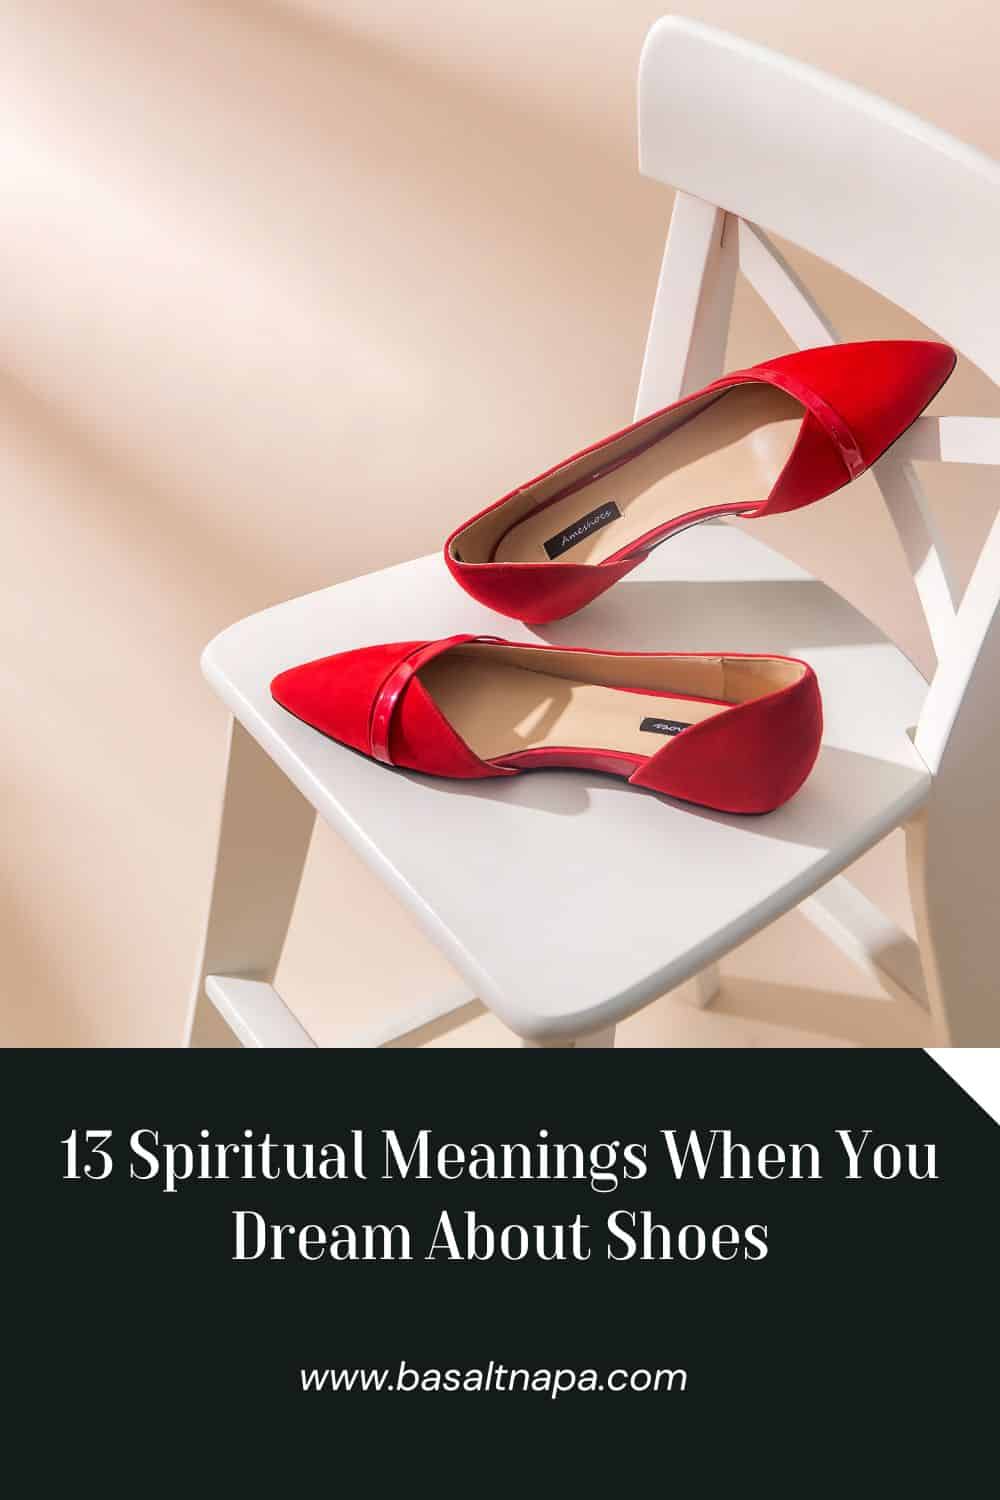 13 Spiritual Meanings When You Dream About Shoes